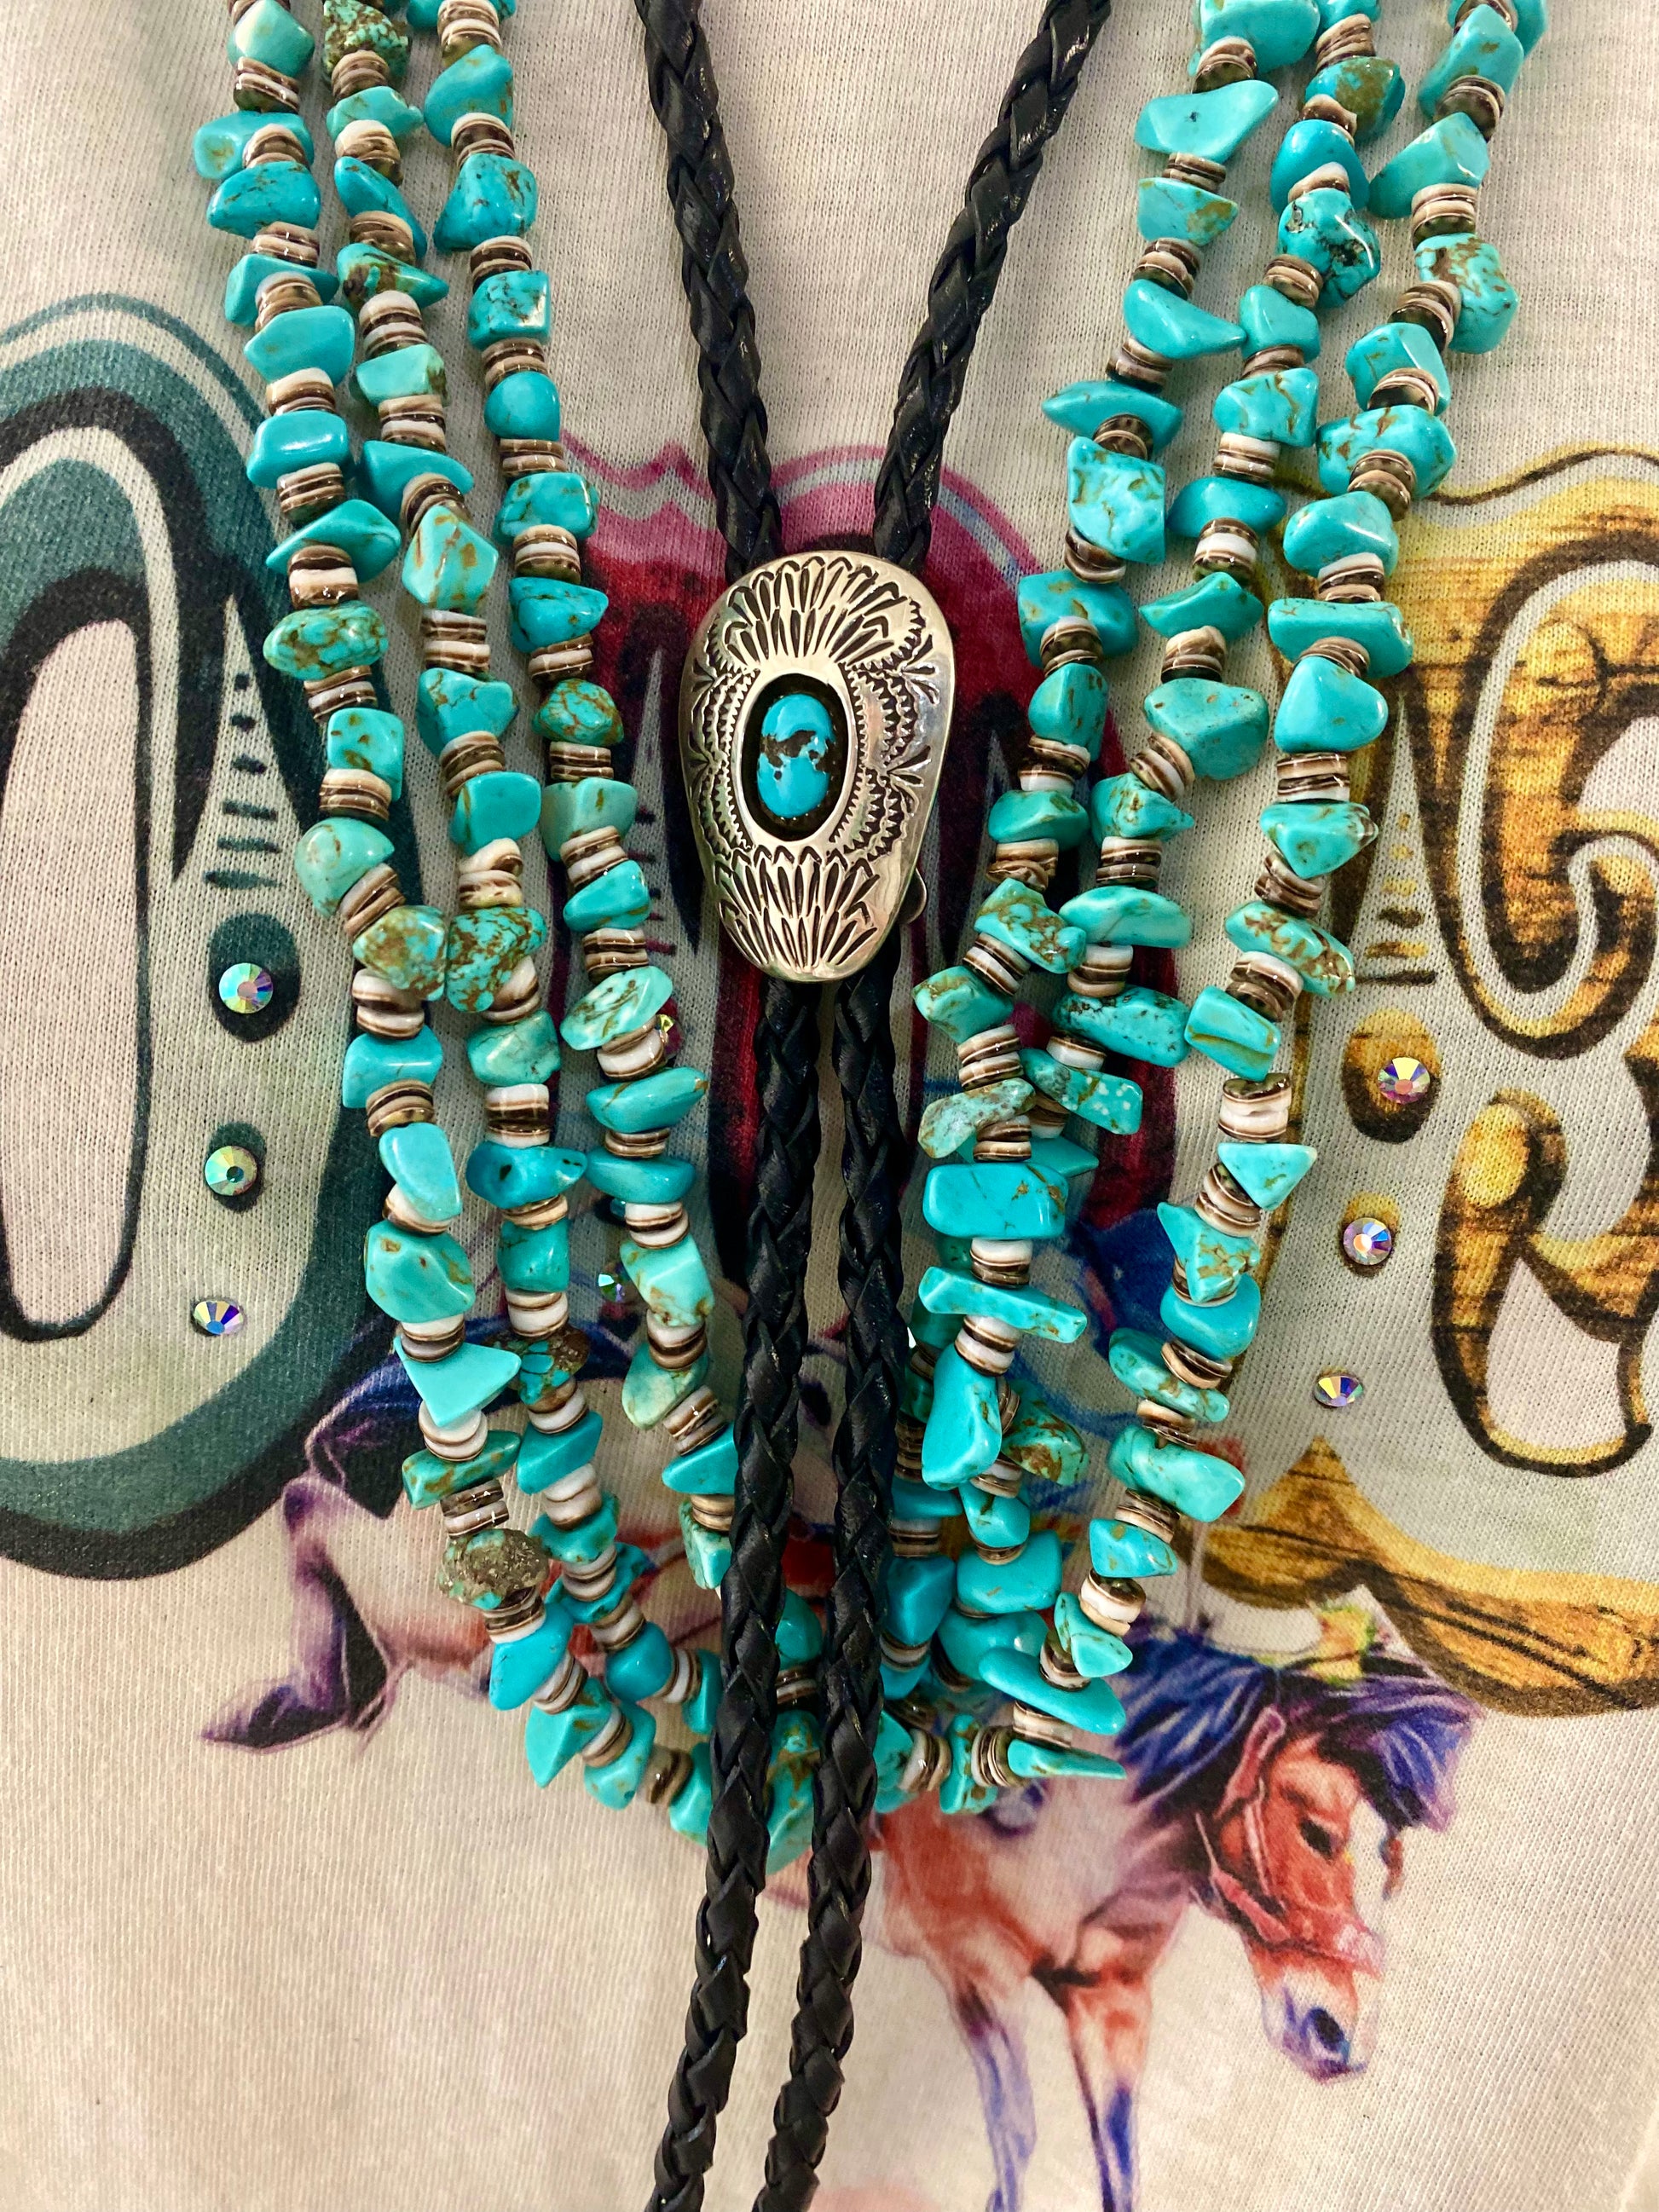 Black bolo tie necklace with single turquoise stone. A beautiful statement piece to add to your jewelry or formal attire collection. Bolo tie silver pendant with turquoise is adjustable. It can be slide up and down the leather bolo strands. The Angelo Turquoise Bolo Tie | Western Native Made Bolo 